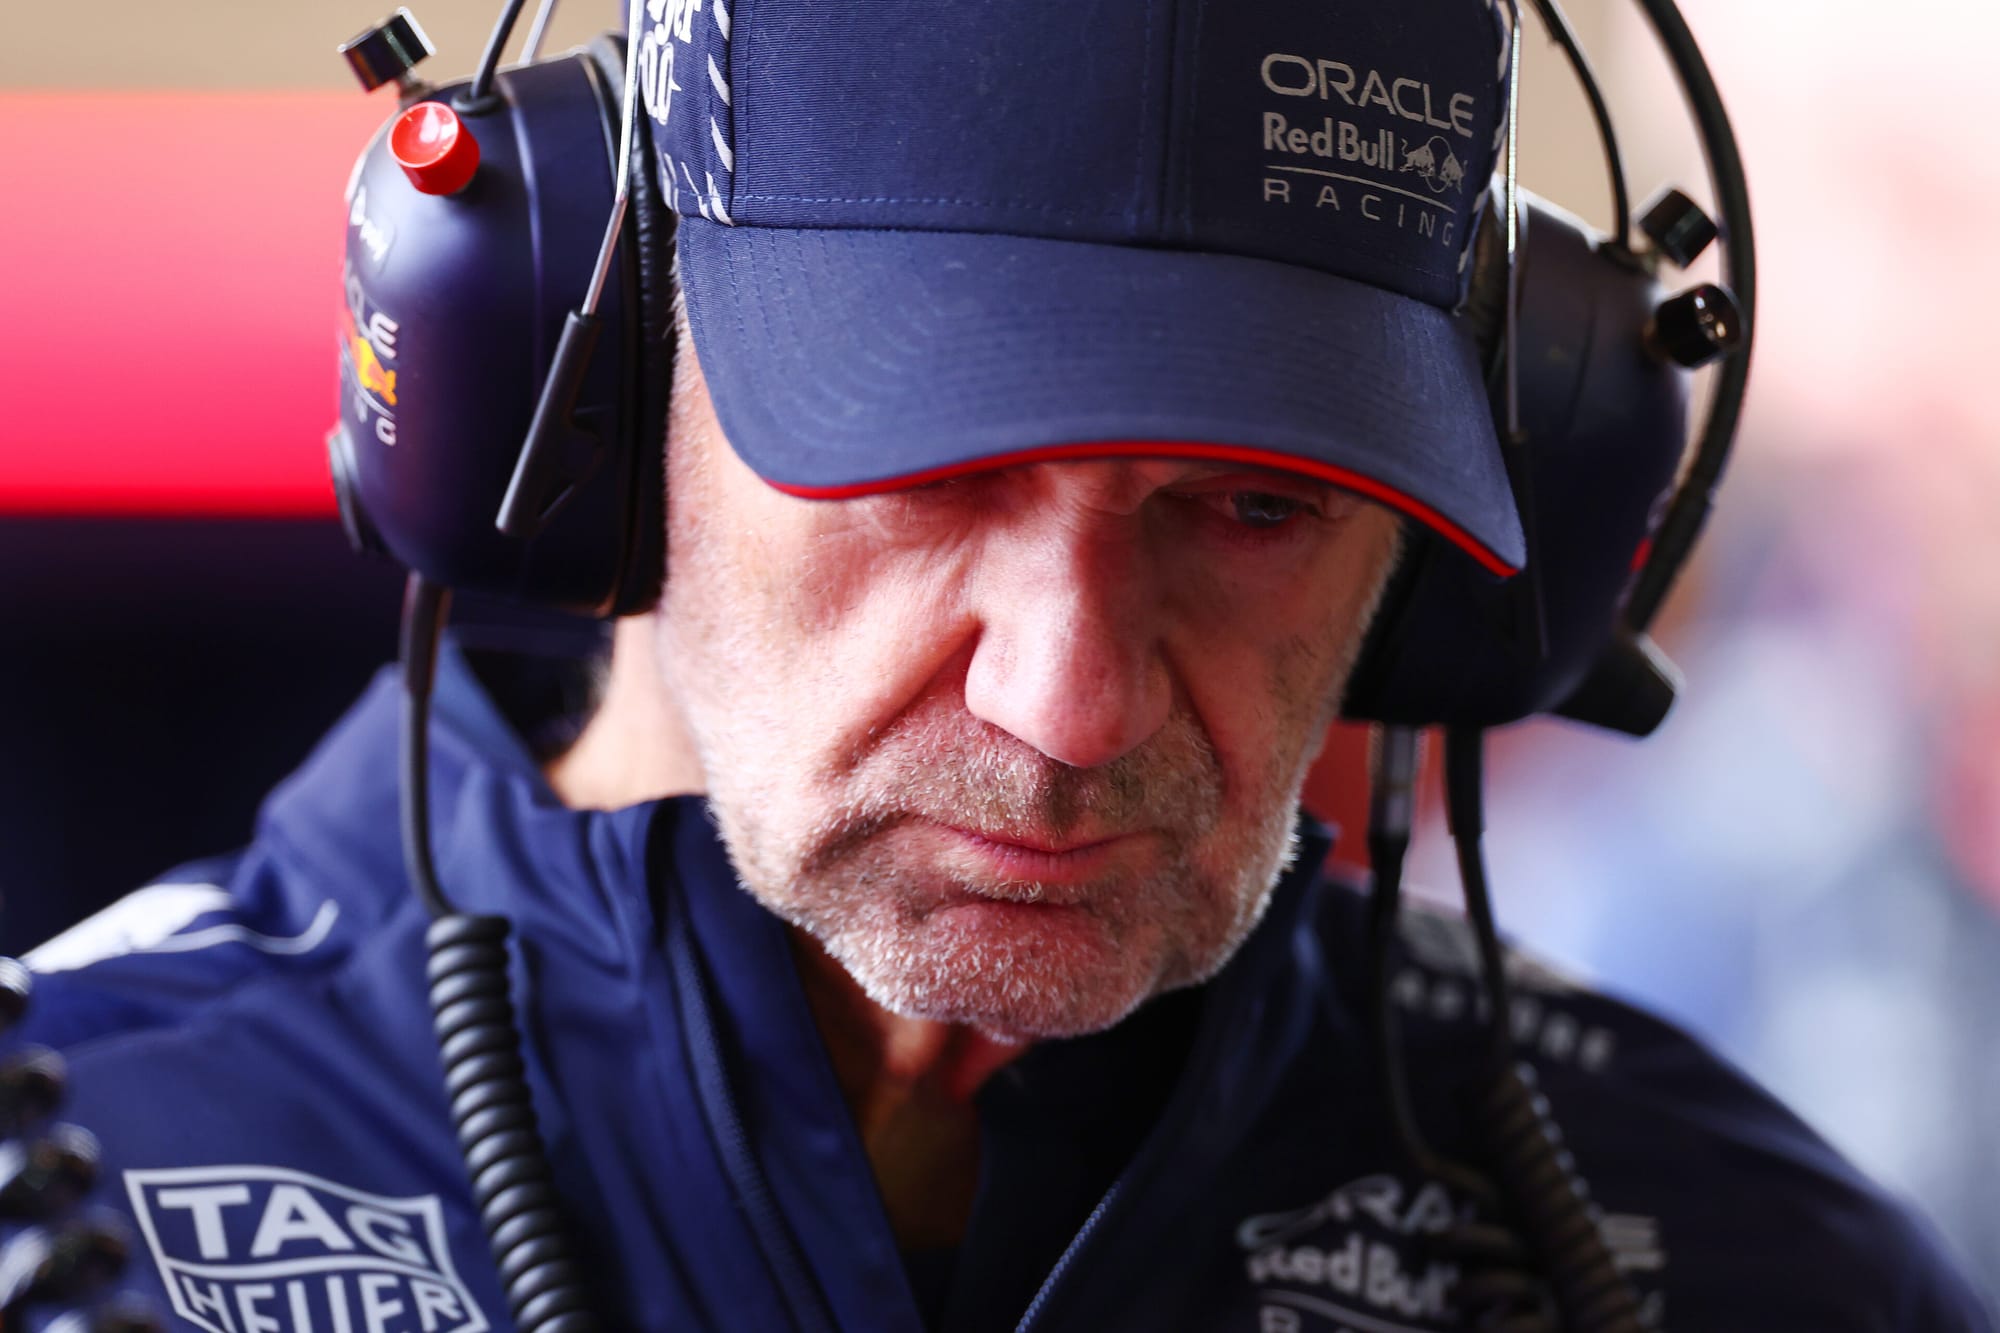 Adrian Newey looks set to leave Red Bull in 2025